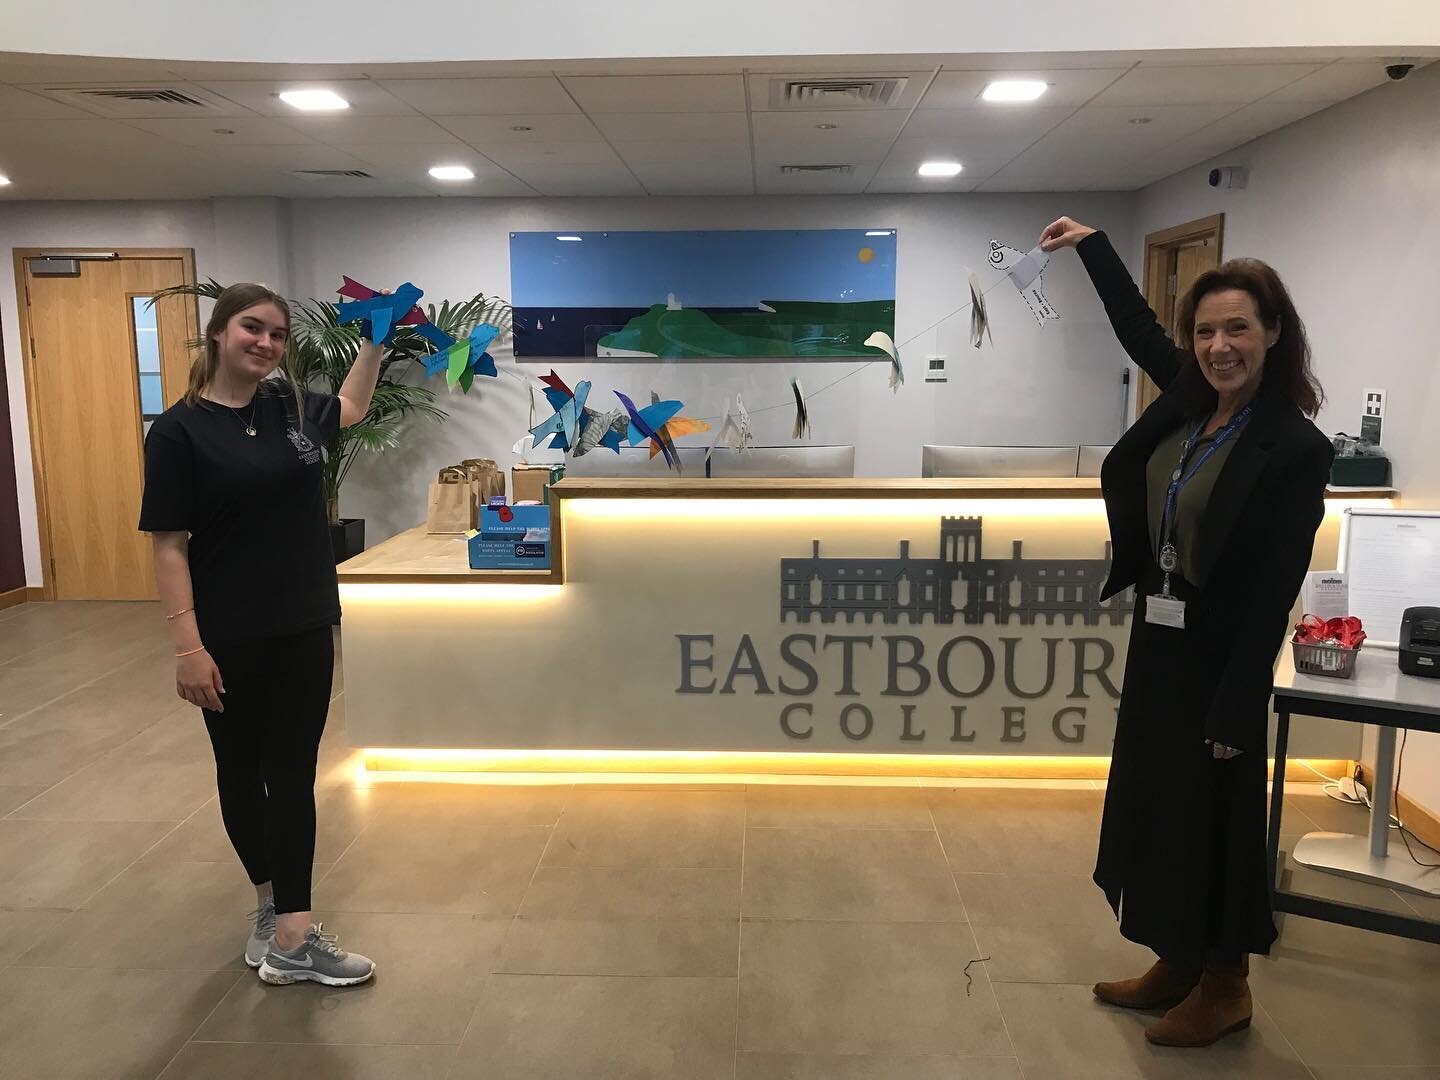 Wonderful #Birds2BHeard from @eastbournecollege &hellip;thank you for joining the flock! 🕊🕊🕊

Keep an eye out for BBC South Today at 6pm, today or tomorrow, for a piece on the #Birds2BHeard project&hellip;these messages are taking wings! 

#eastbo